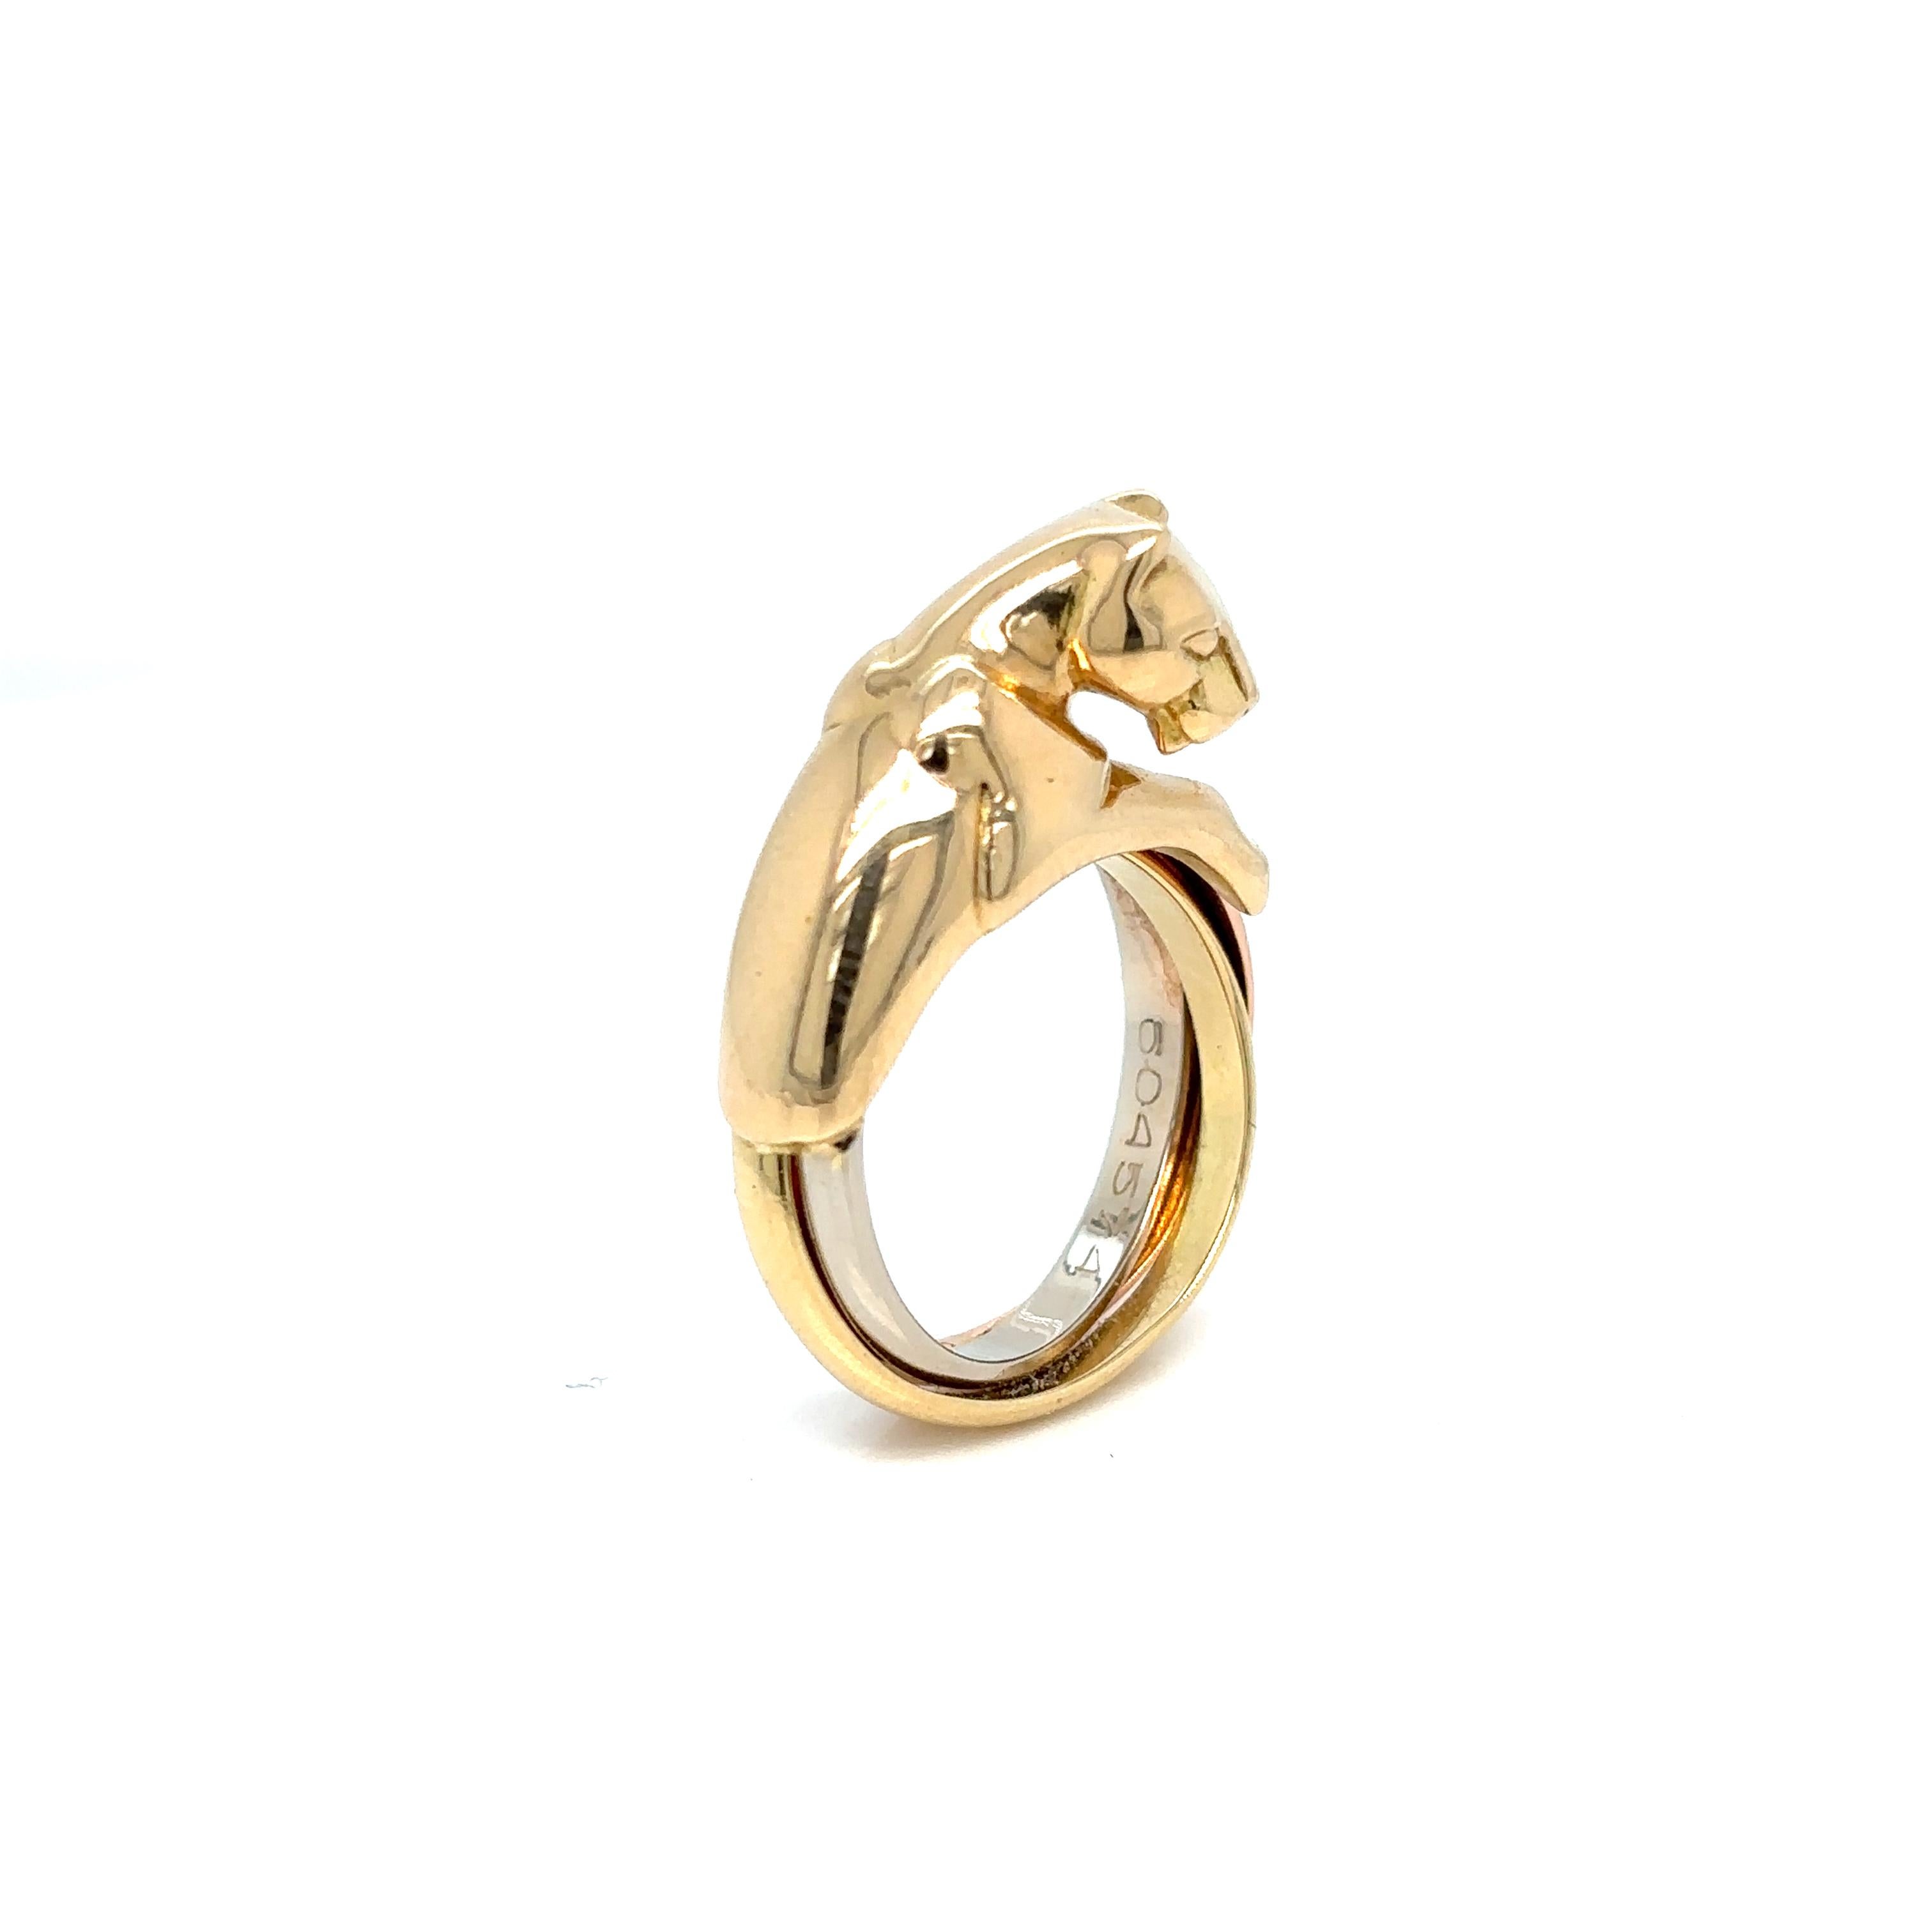 Cartier Panthère Gold Trinity Band Ring im Angebot 4